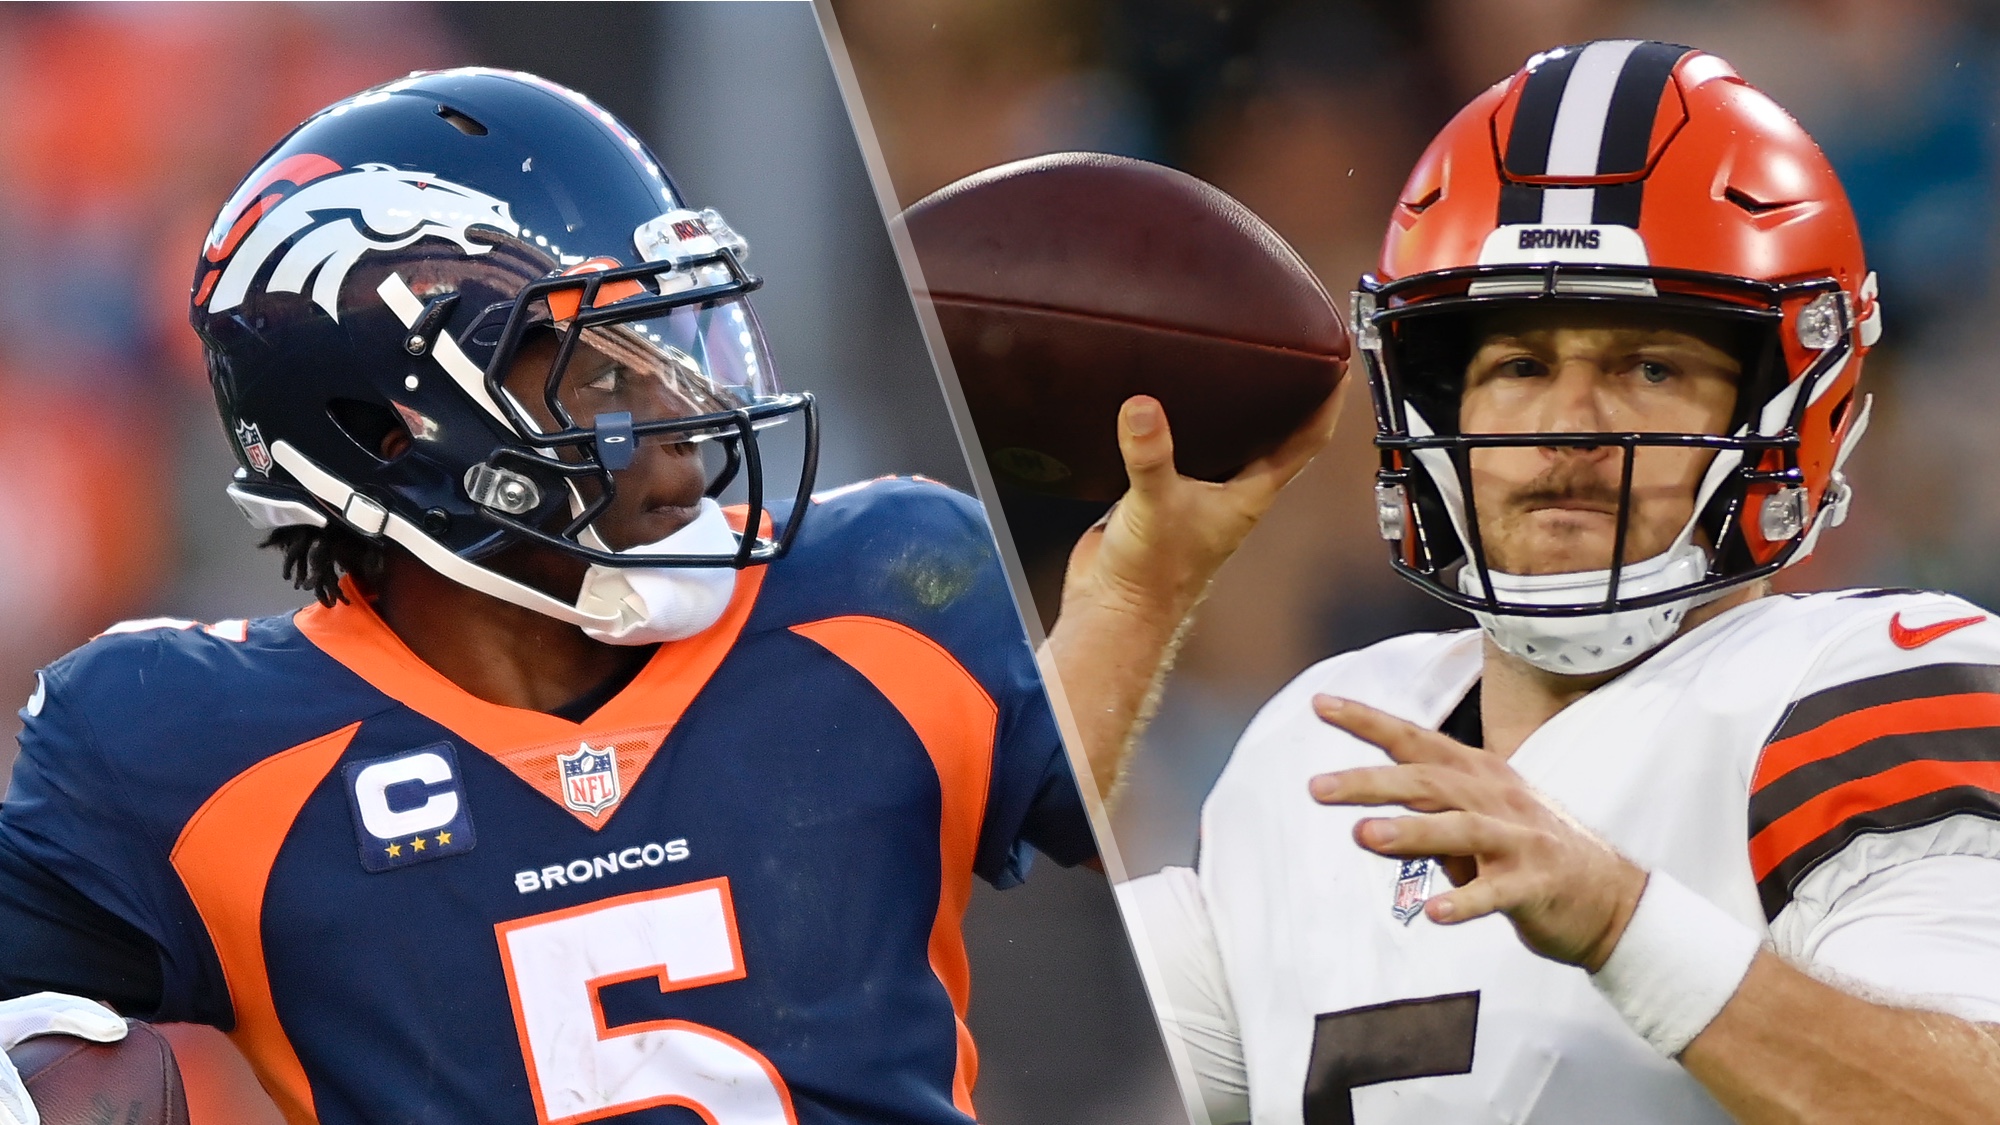 Broncos vs Browns live stream is here: How to watch Thursday Night Football